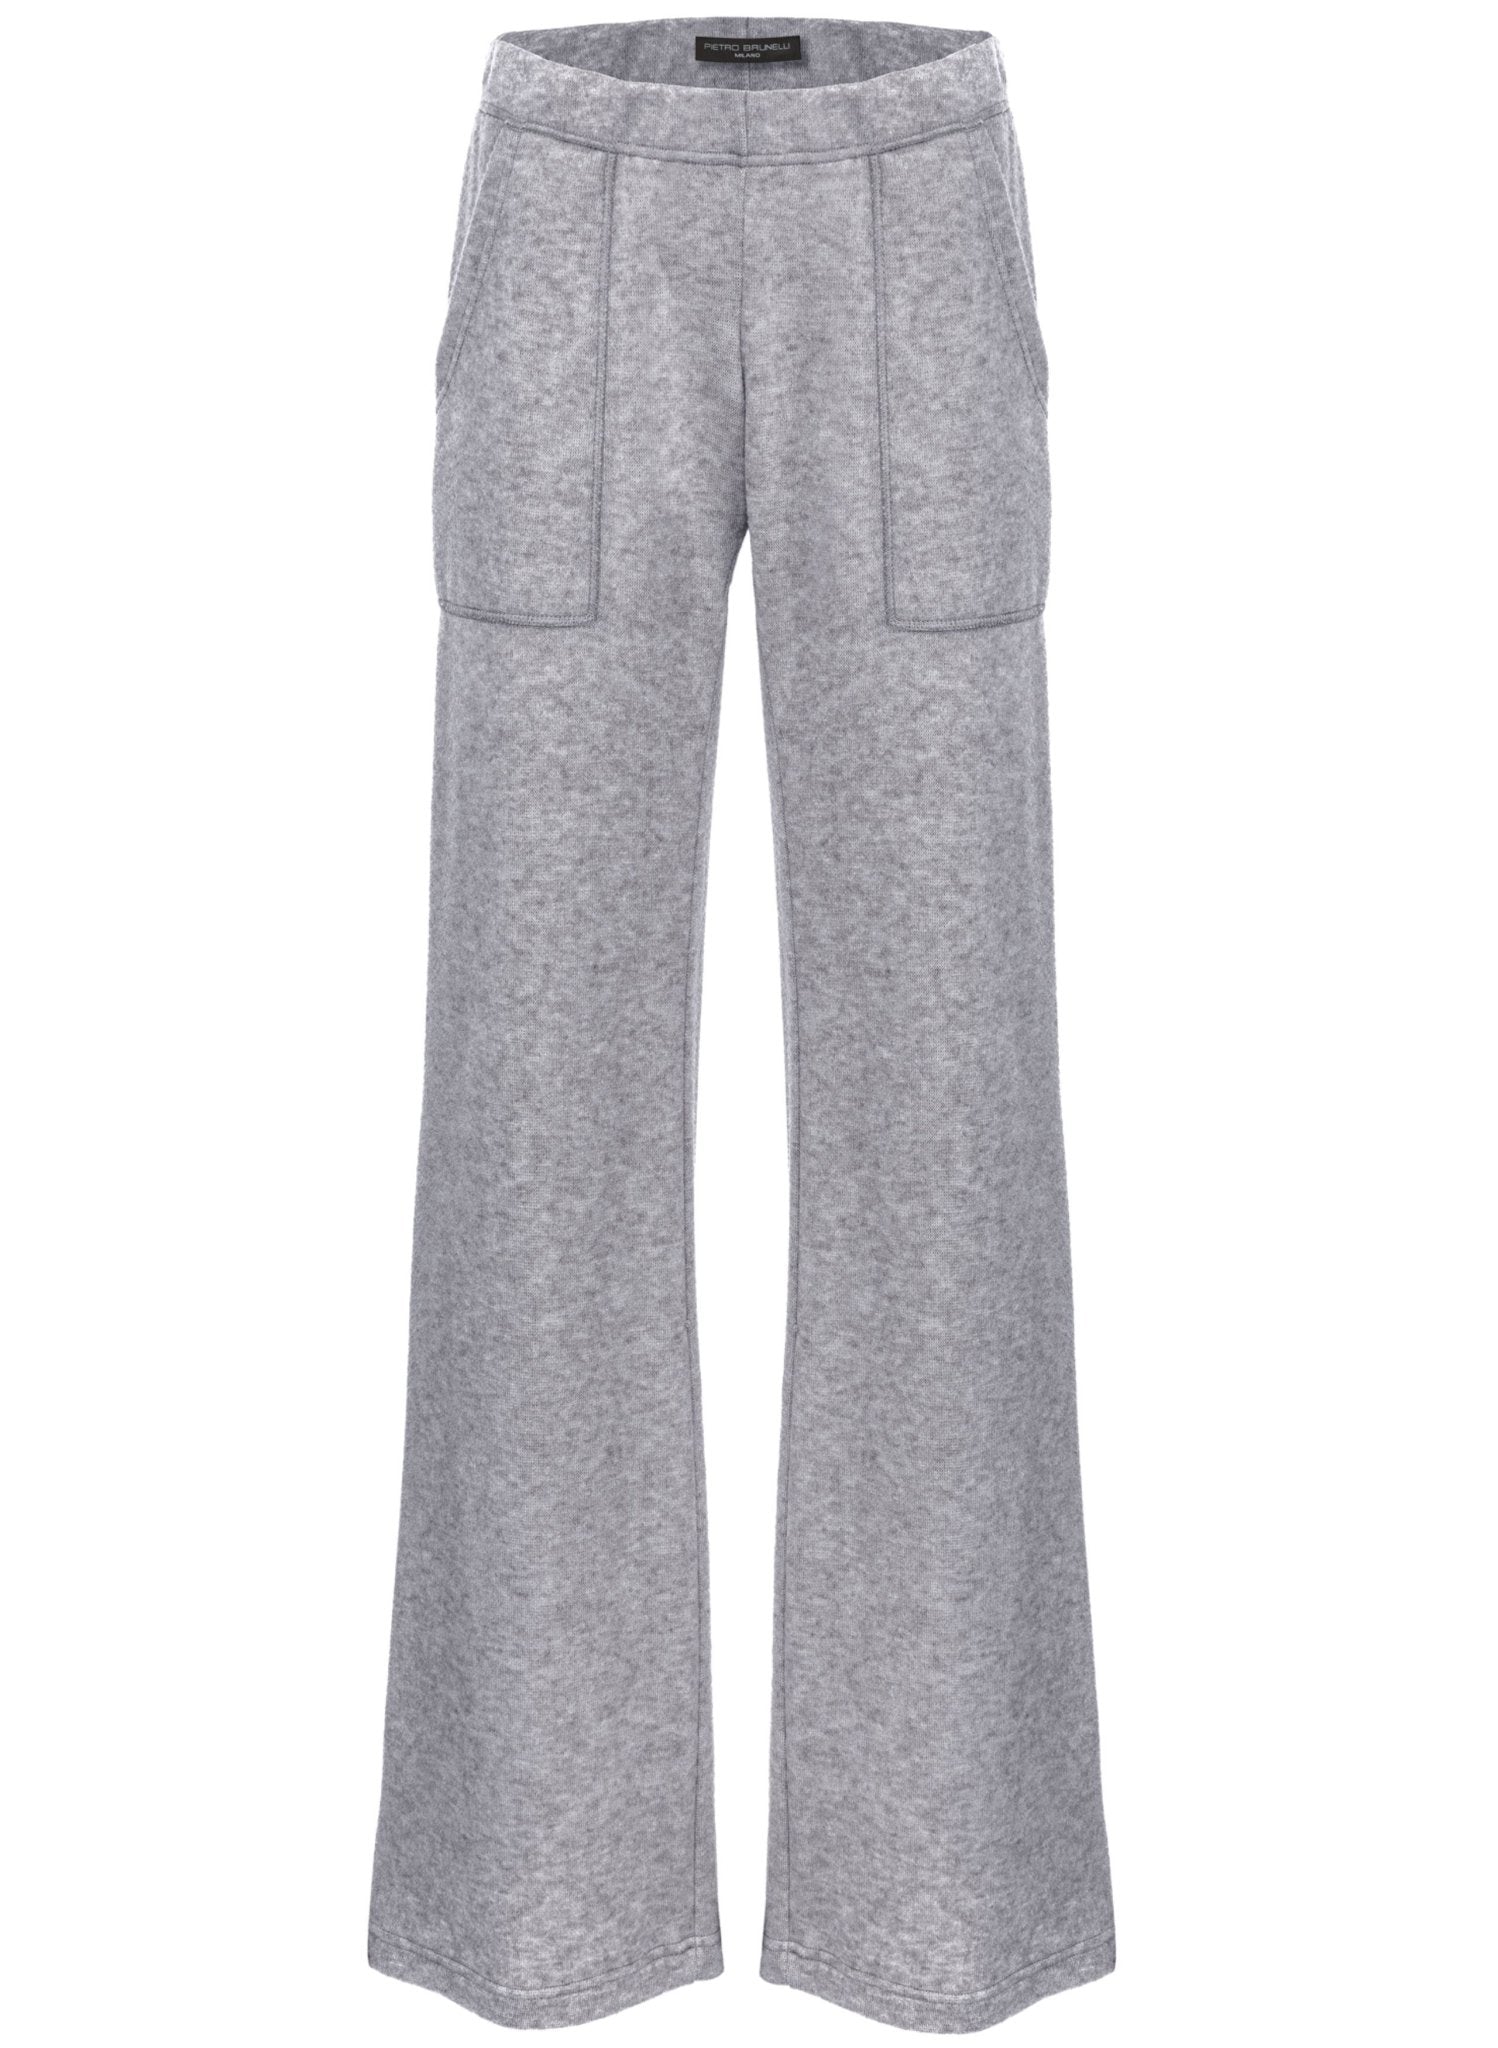 Cozy Maternity Trousers - Heather Grey - Mums and Bumps